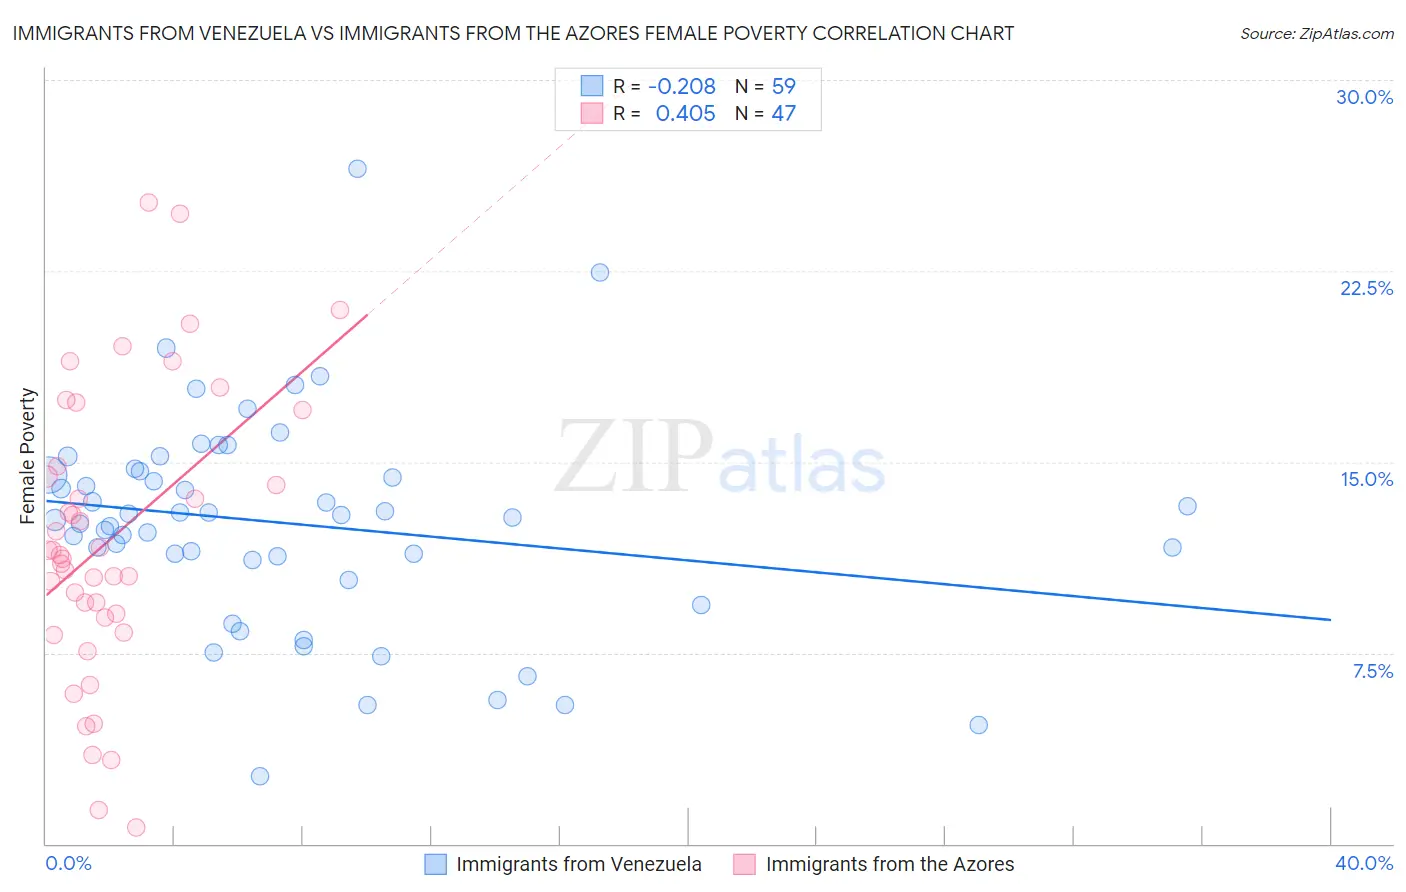 Immigrants from Venezuela vs Immigrants from the Azores Female Poverty